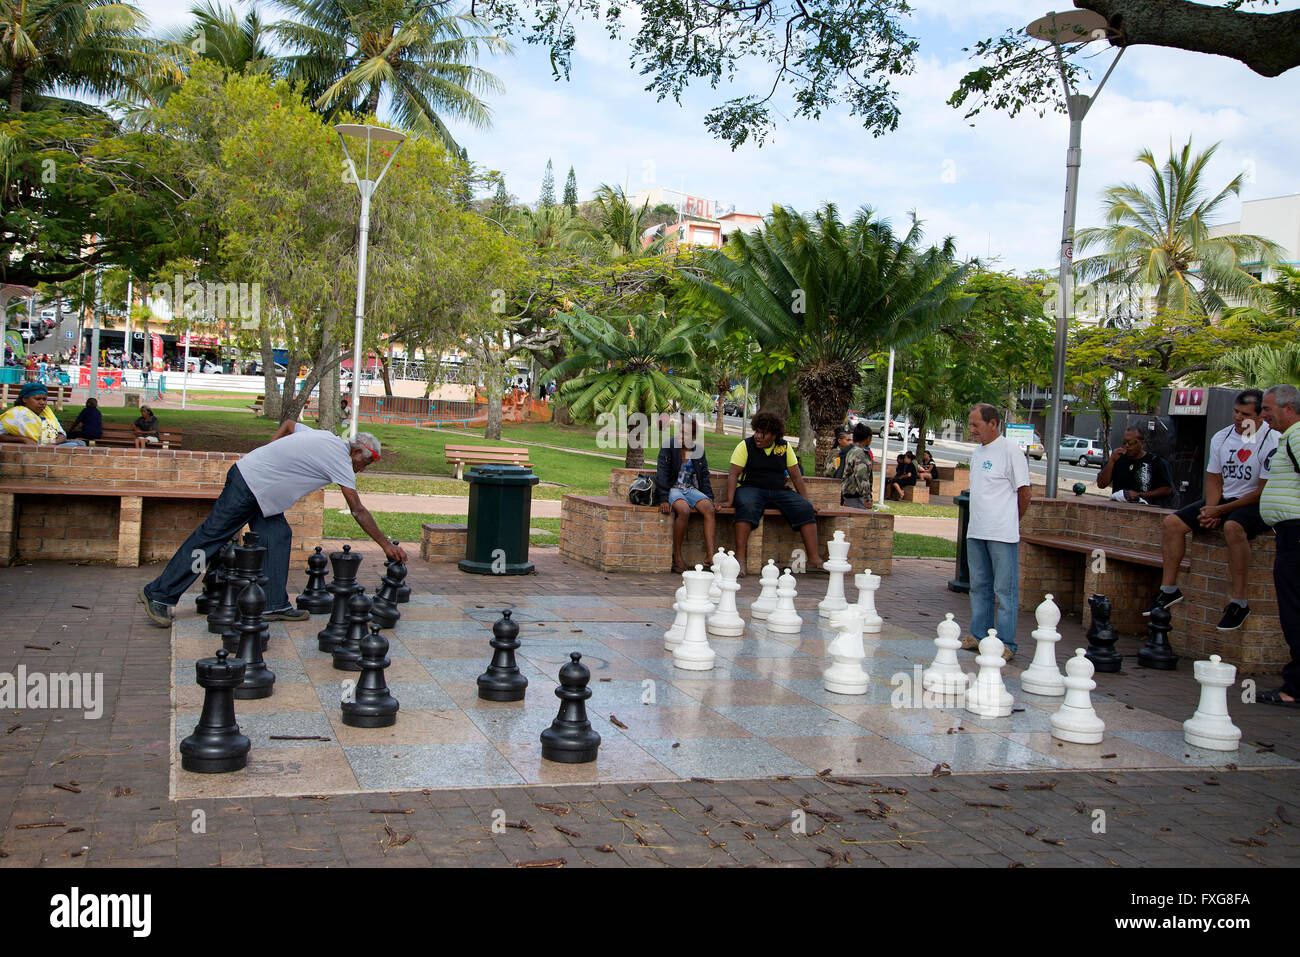 Local men playing chess outside in the park. Noumea, New Caledonia, South Pacific. Stock Photo